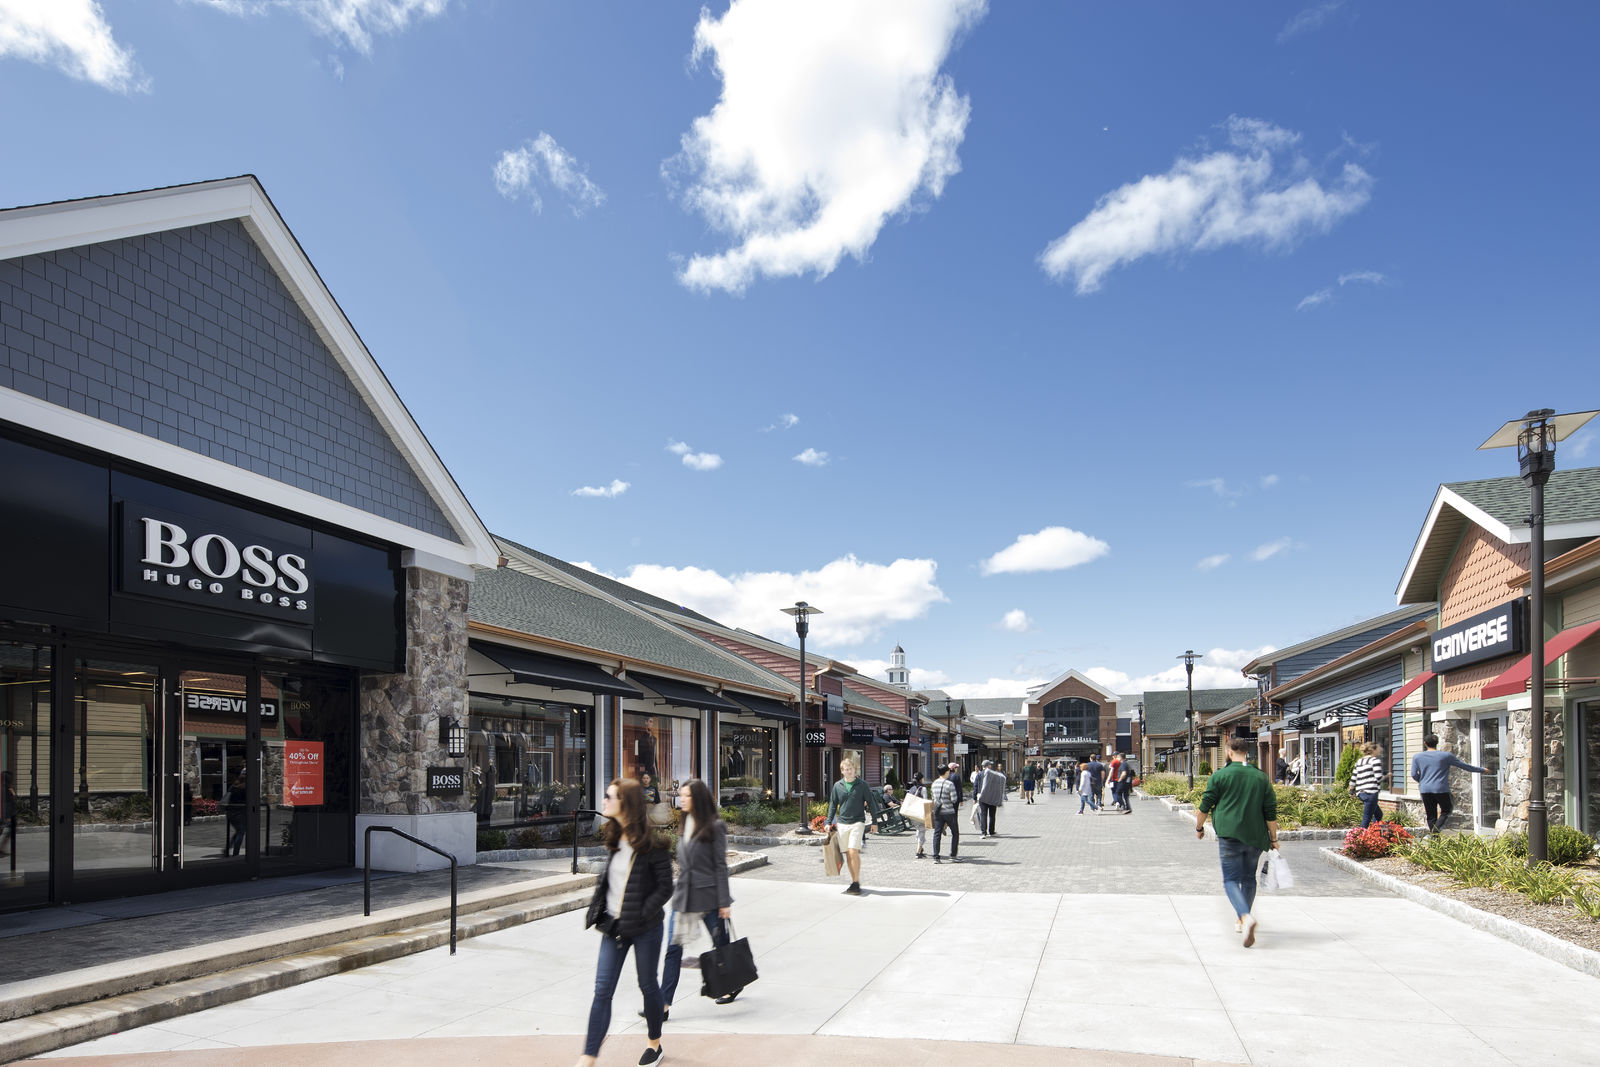 Woodbury Common Premium Outlets Shopping New York City.com : Profile